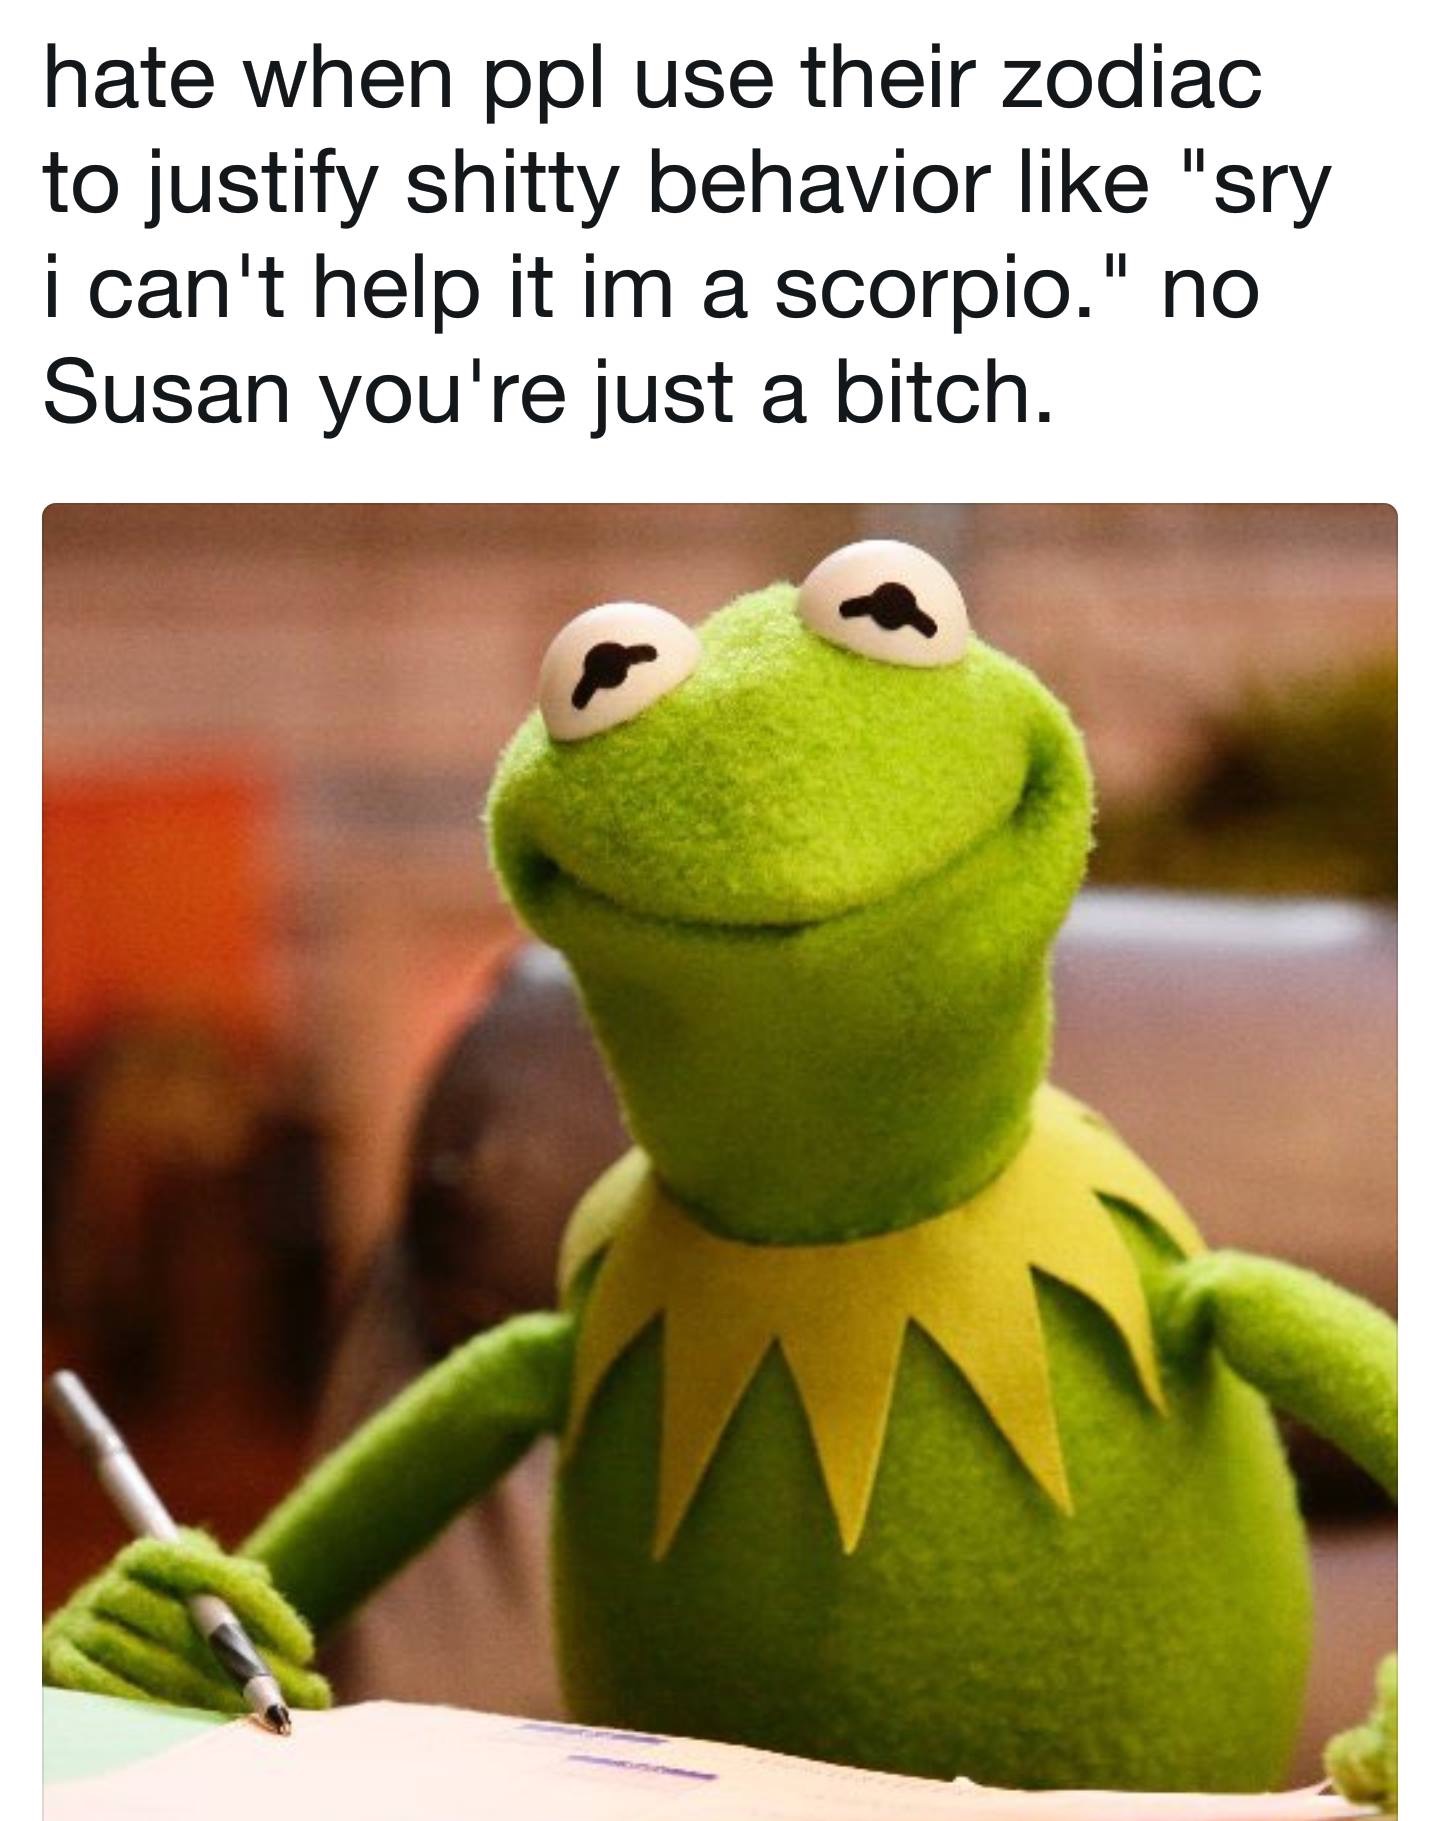 Kermit meme about when people blame their zodiac sign for being a bitch